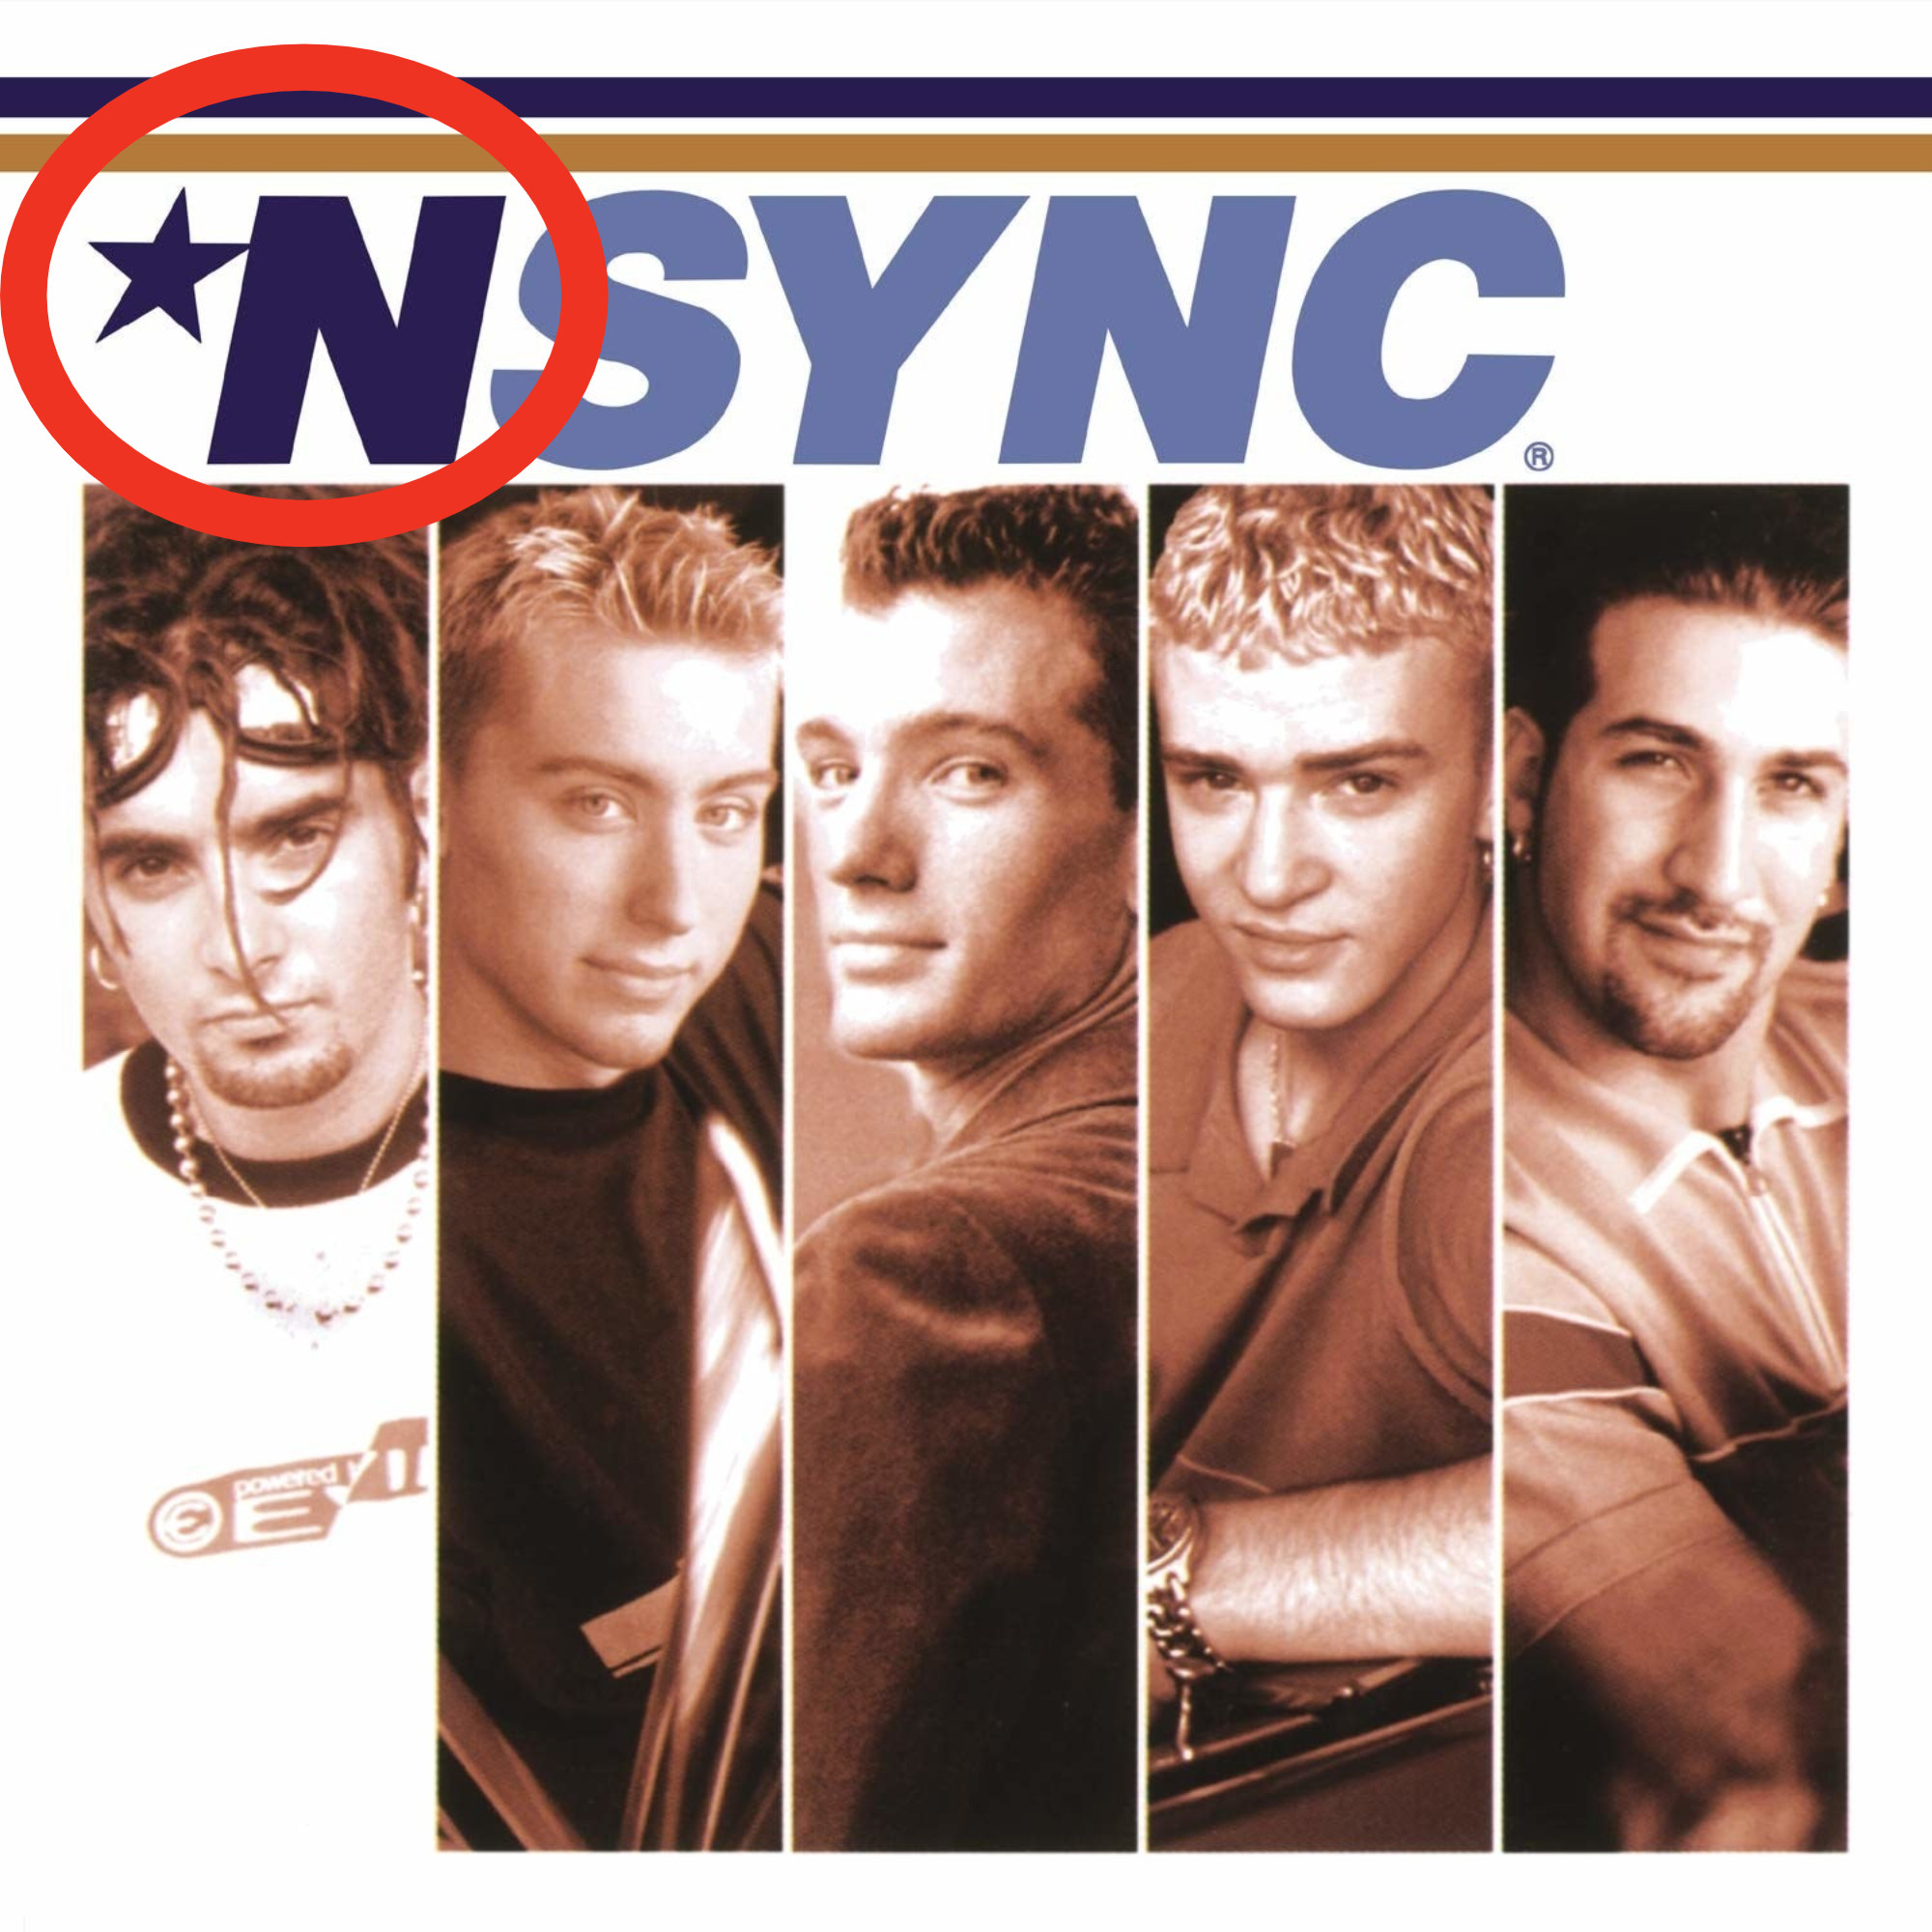 The star circled in front of NSYNC&#x27;s name and the members pictures below